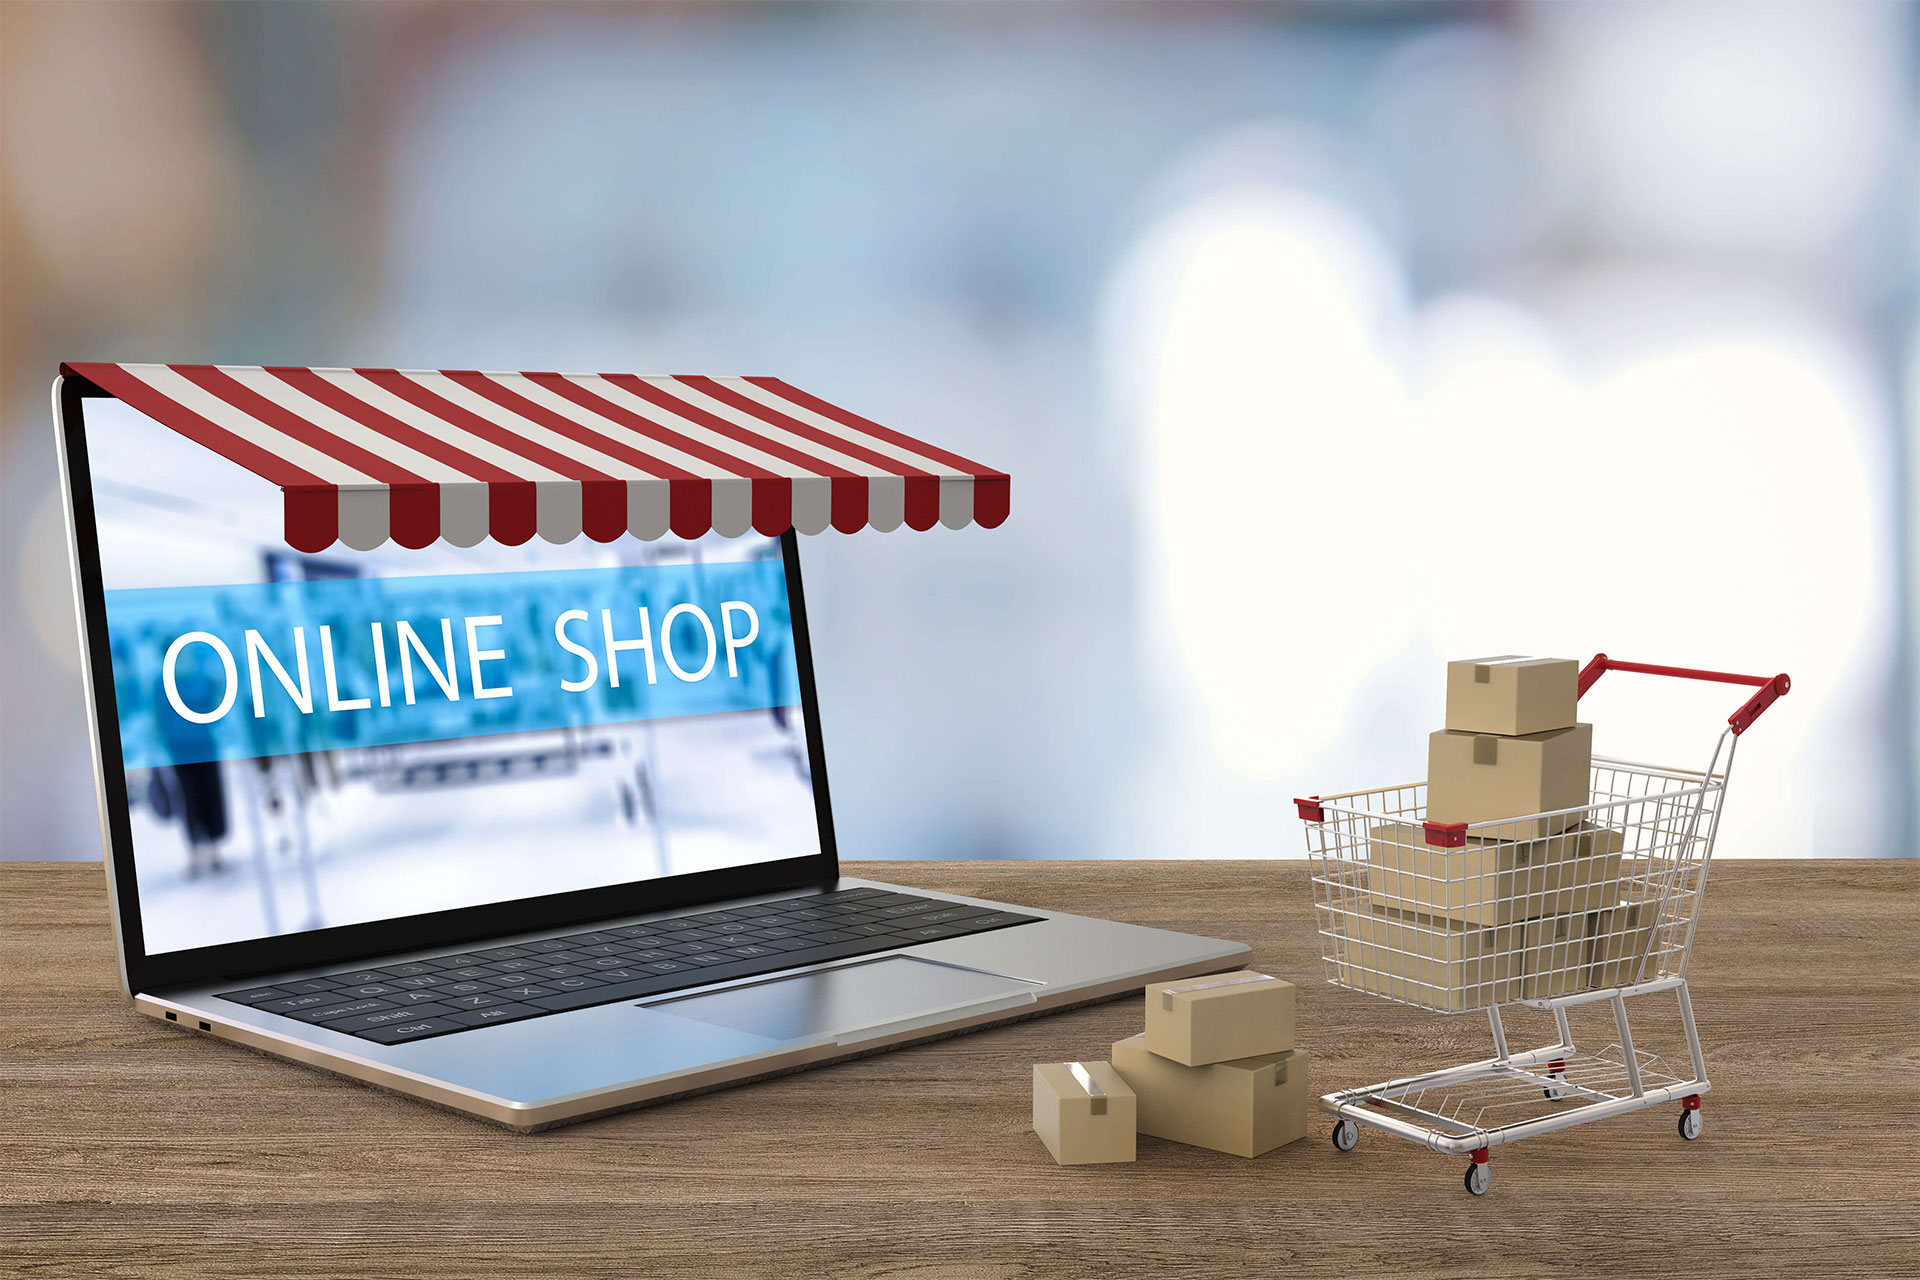 Laptop with shop awning over screen and 'Online Shop' showing on screen